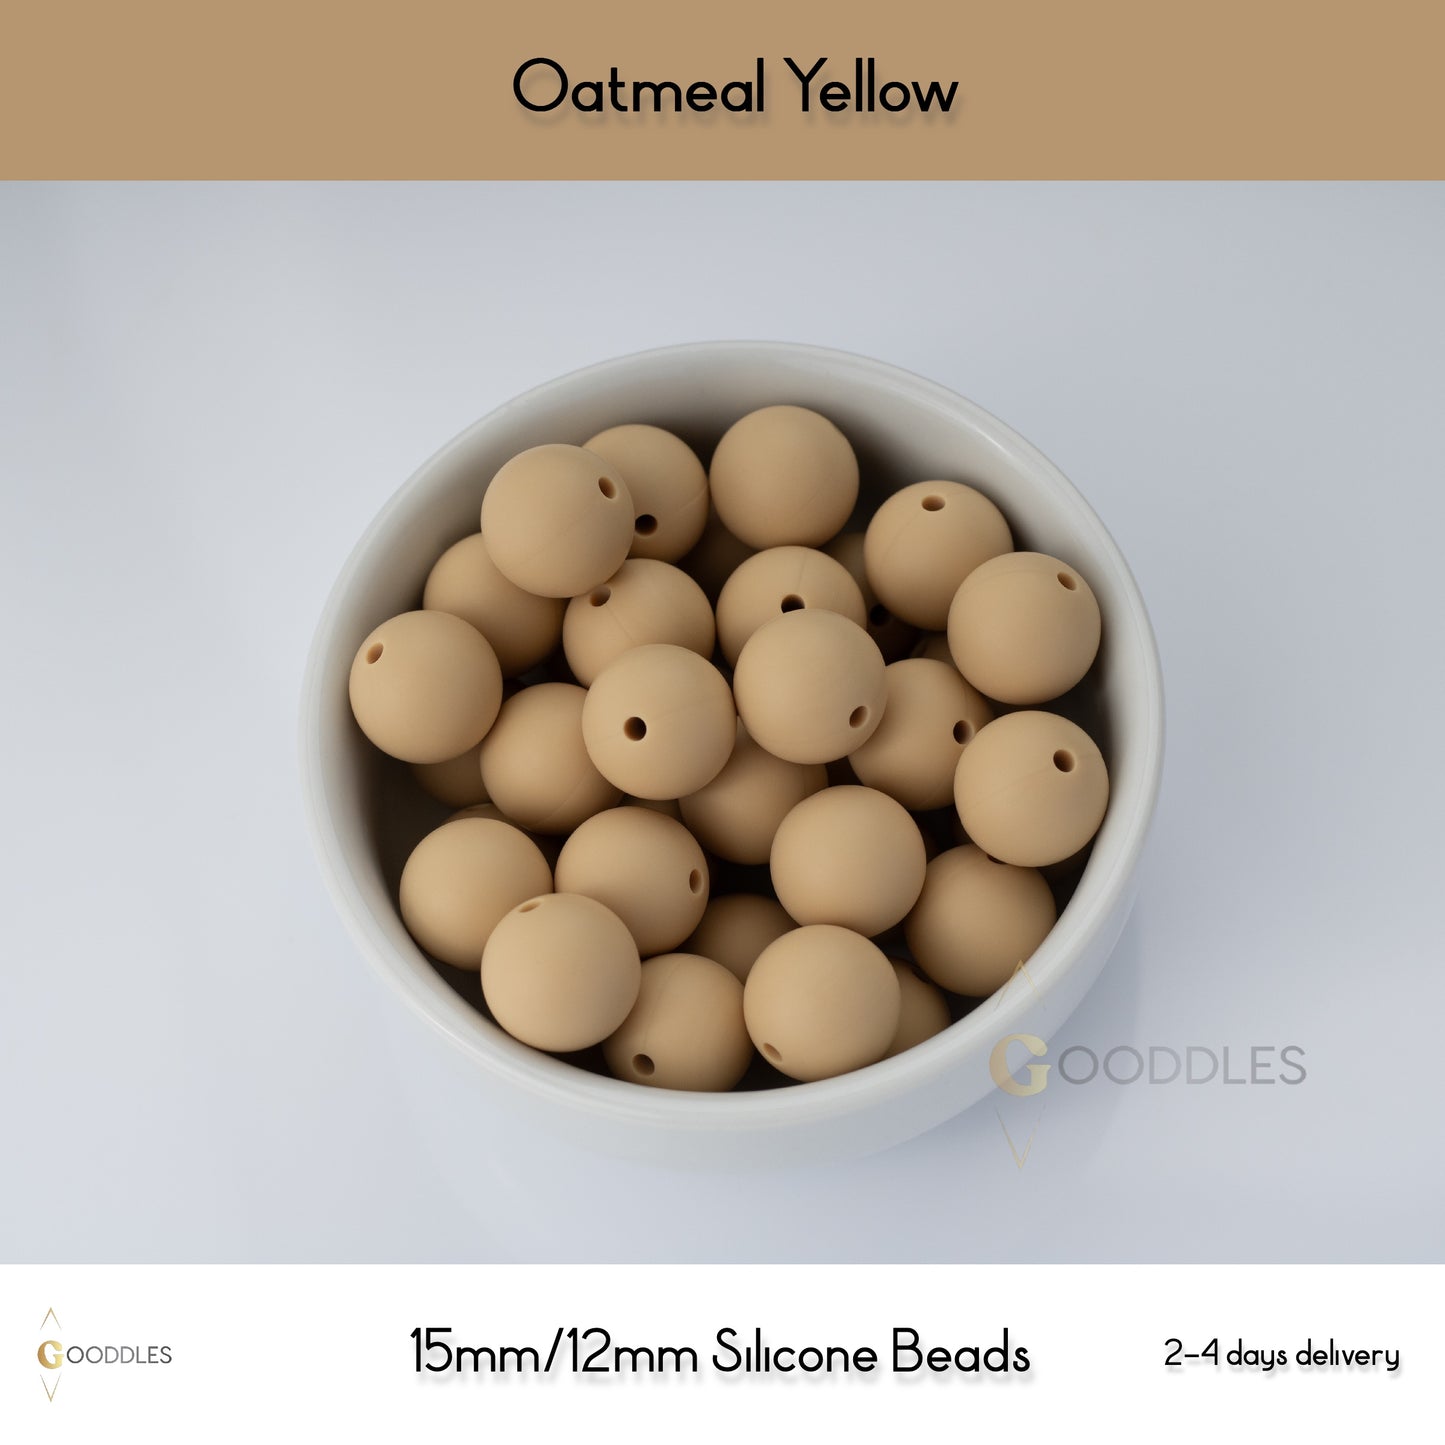 5pcs, Oatmeal Yellow Silicone Beads Round Silicone Beads